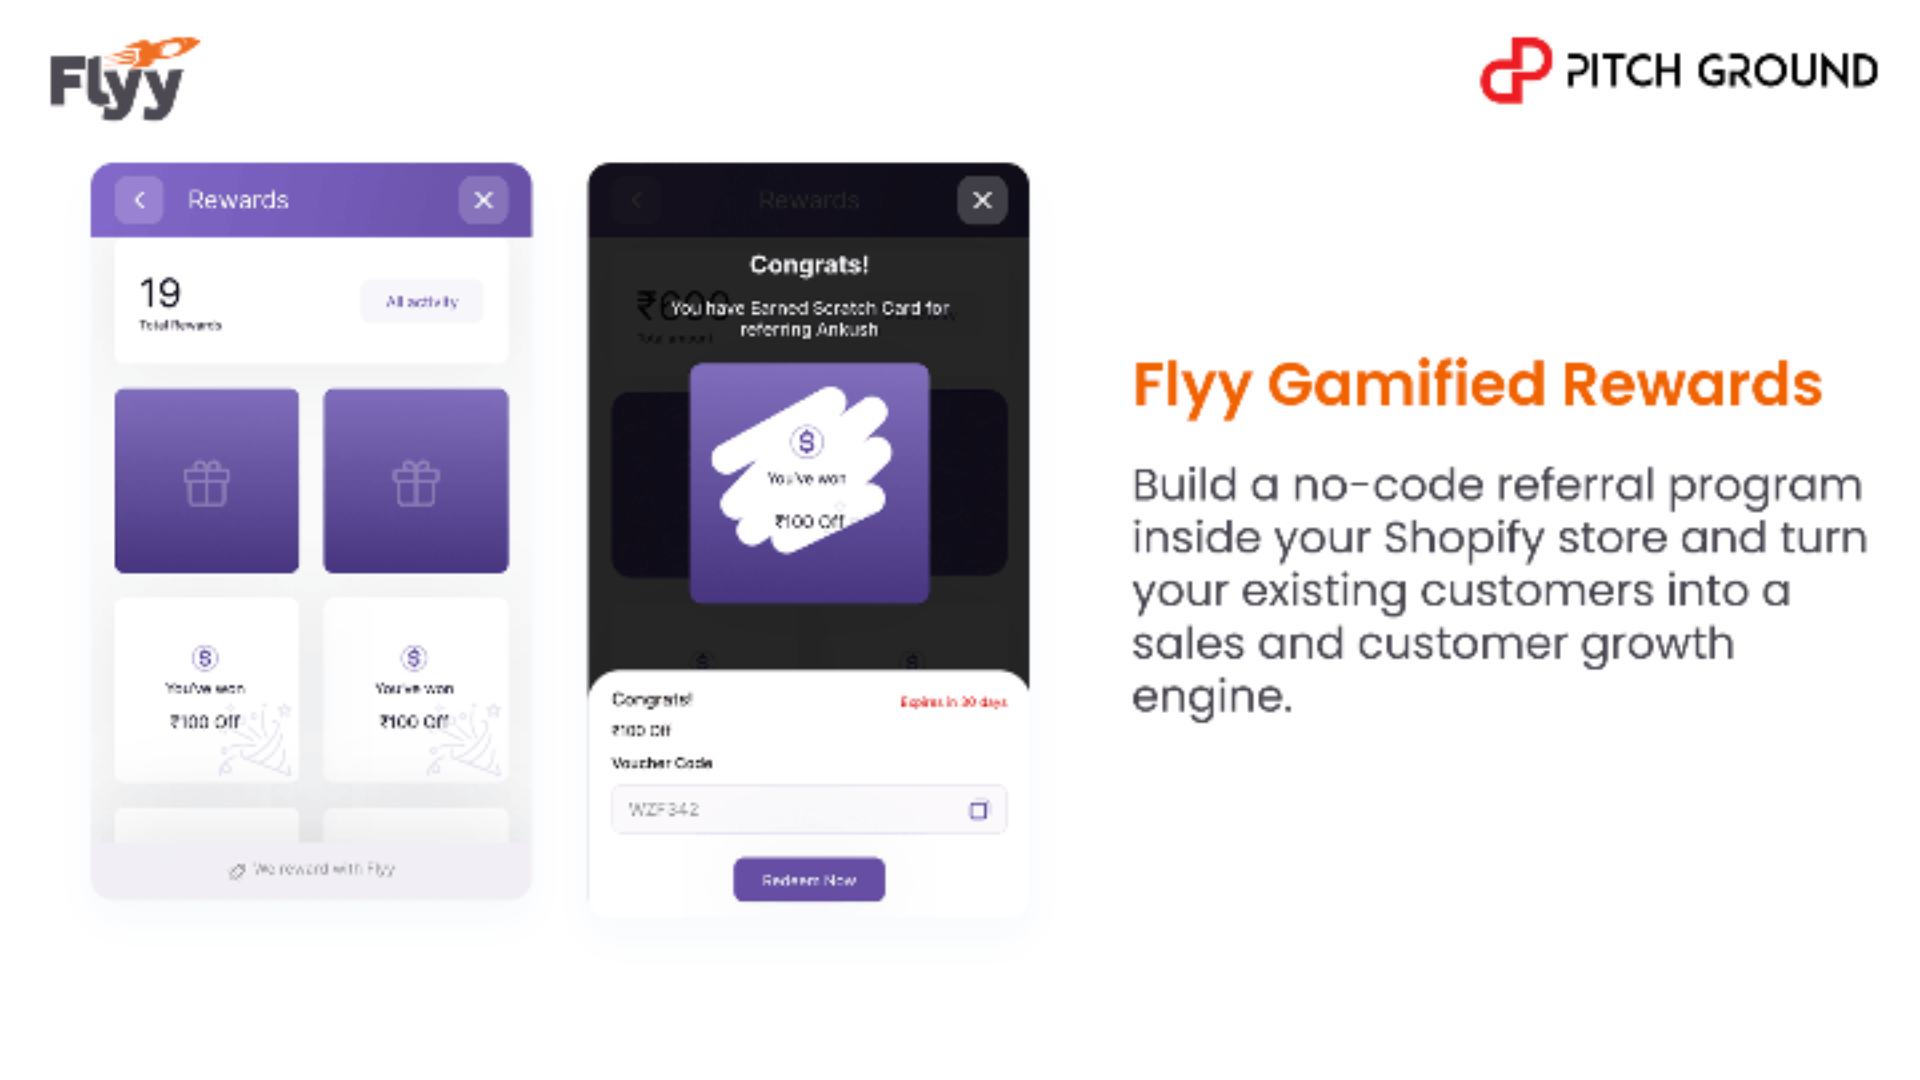 Lifetime Deal to Flyy Gamified Rewards: Acquire Scale for $124